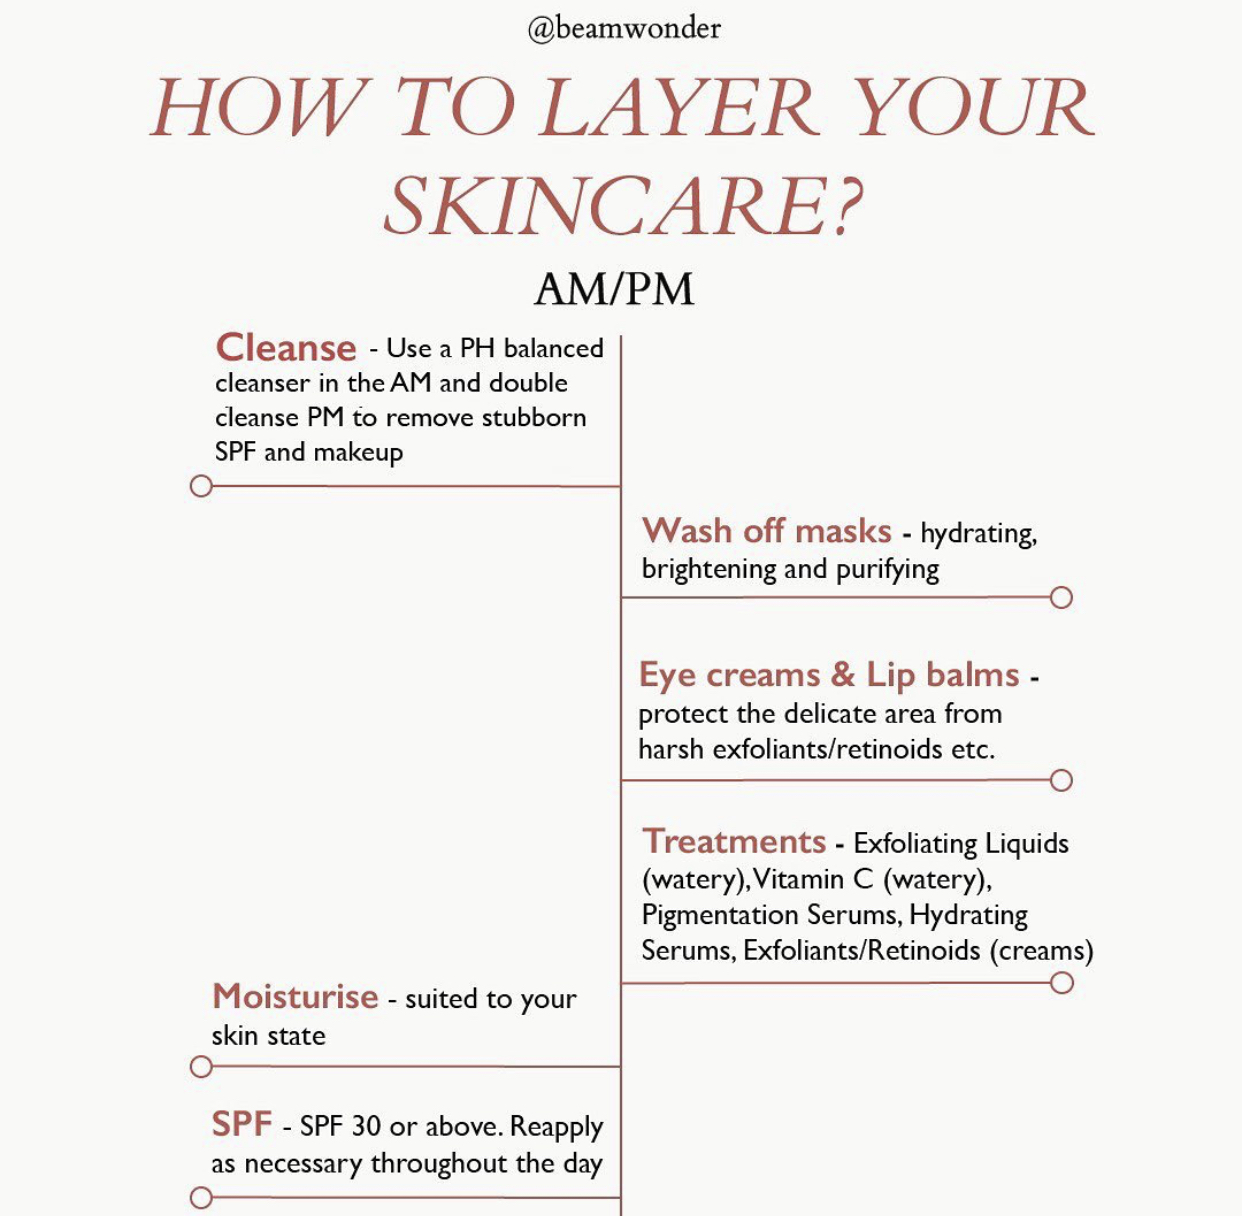 How to layer your skincare?